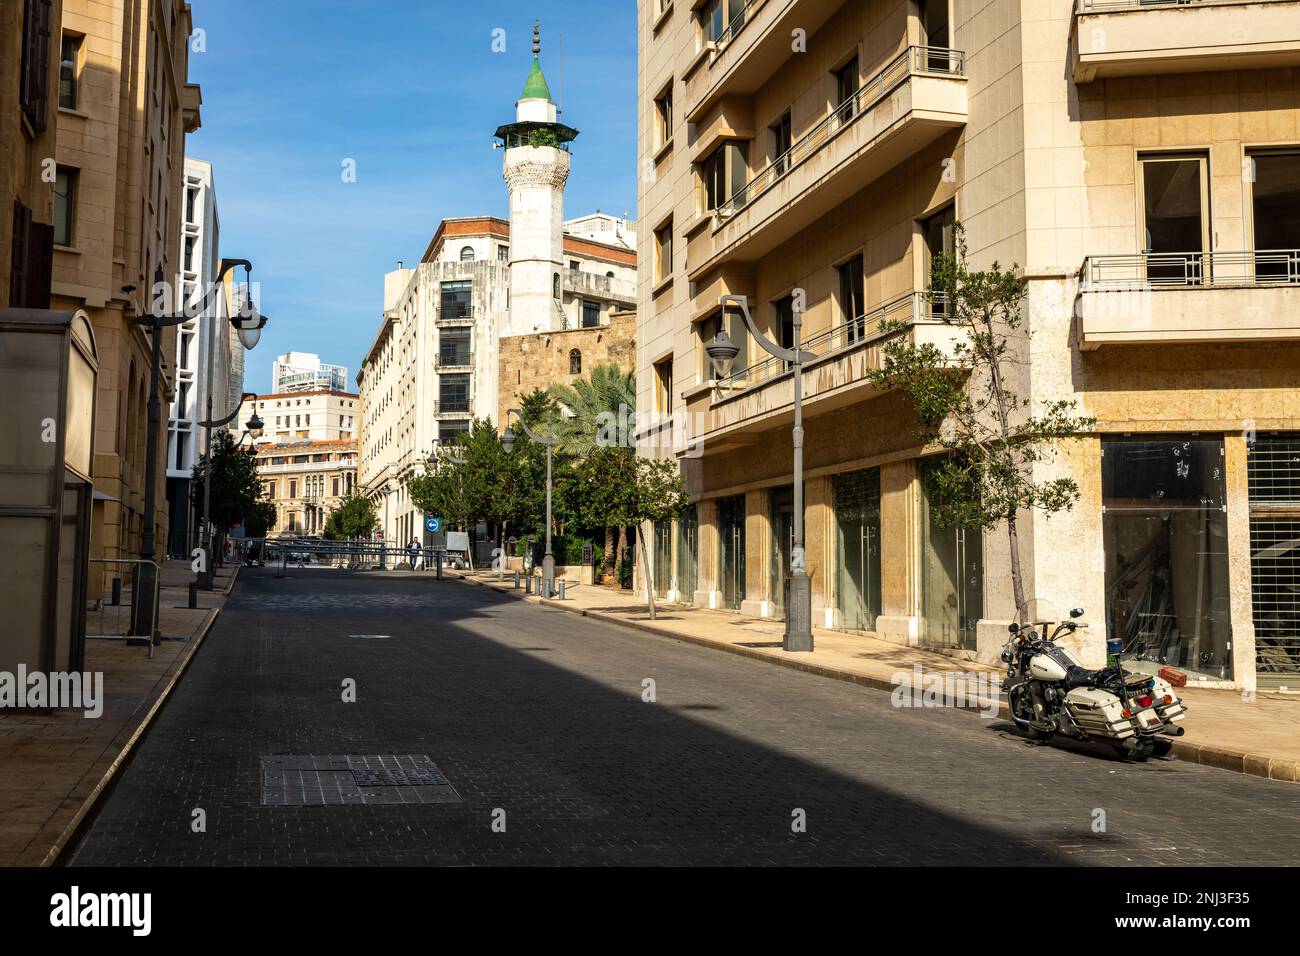 View of Nijmeh Square in Beirut. Traditional architecture in the old town of Beirut. Lebanon. Stock Photo